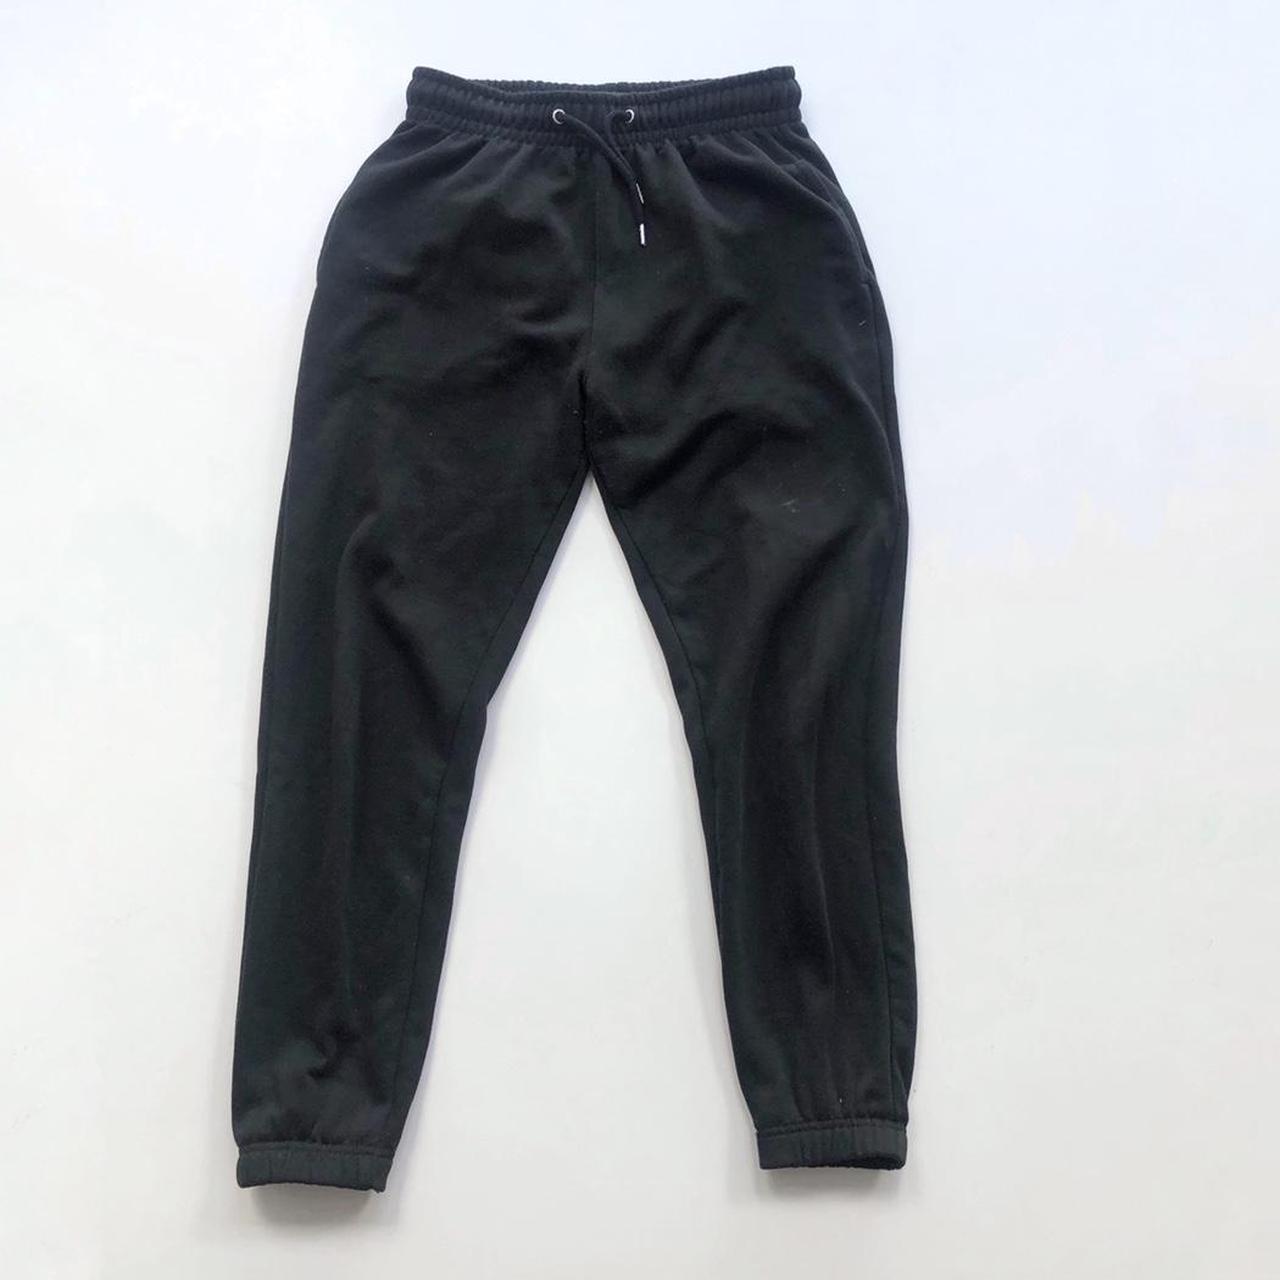 Product Image 1 - Black men’s cuffed joggers 
Size